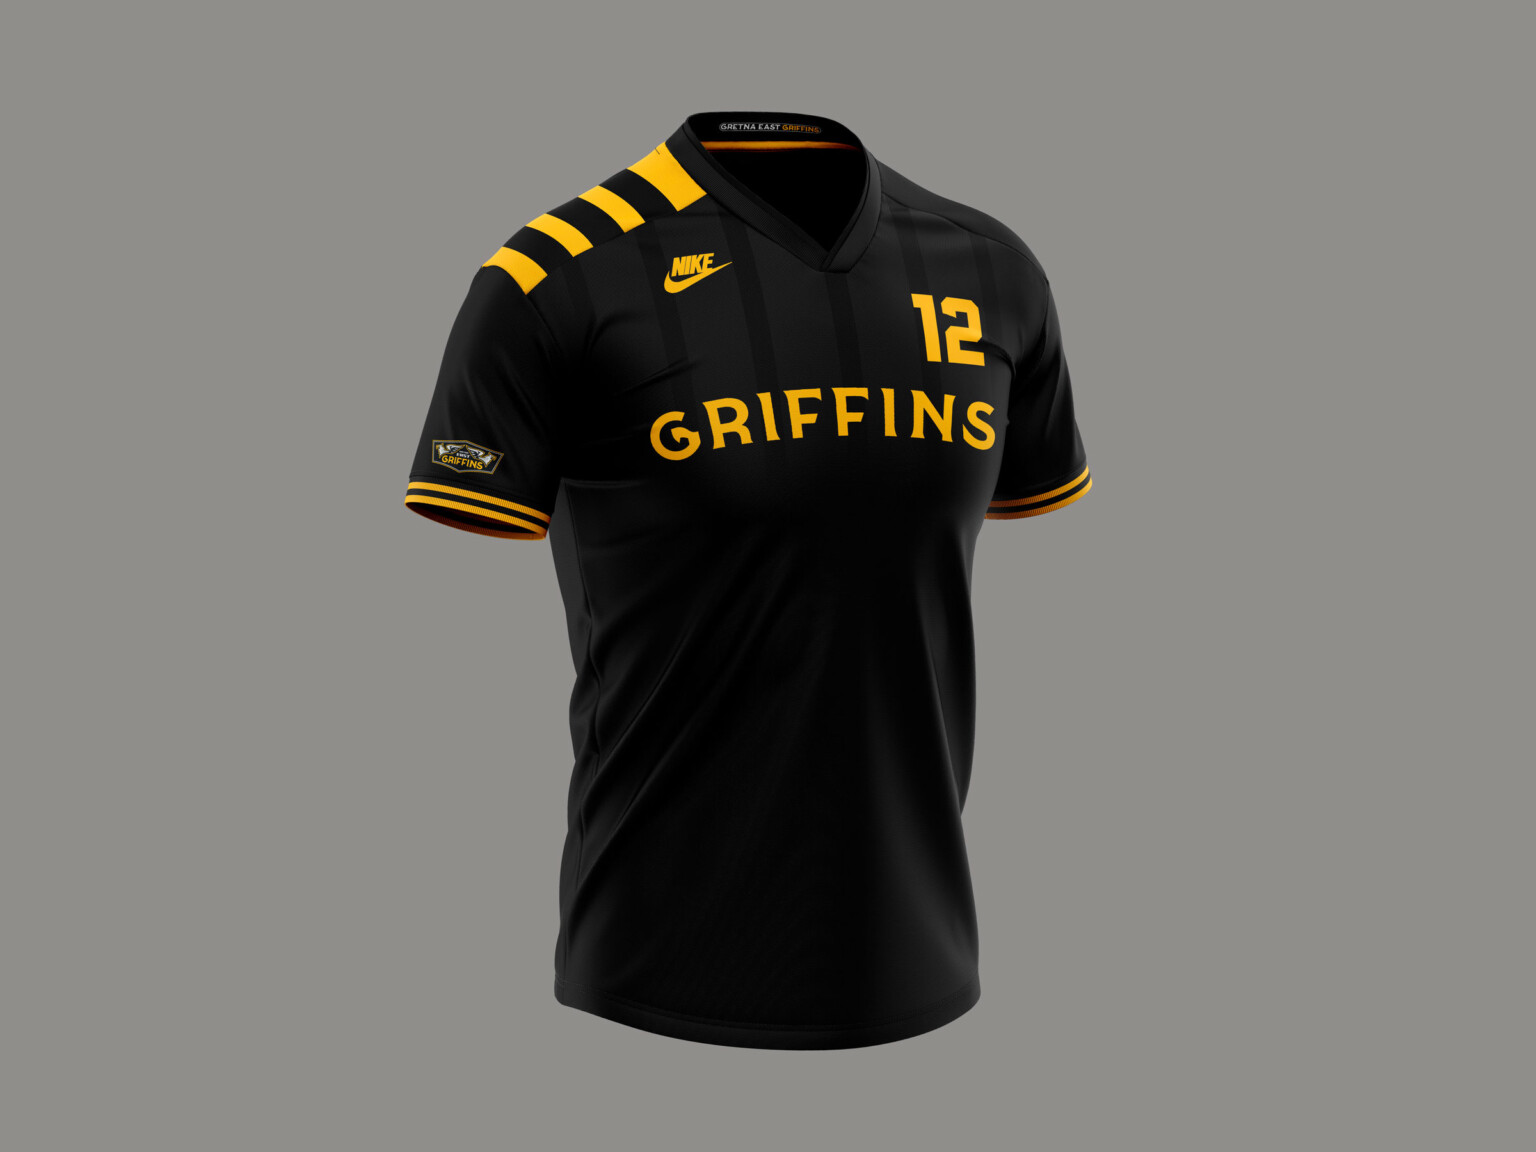 Black jersey tshirt with yellow accents, Griffins written across front